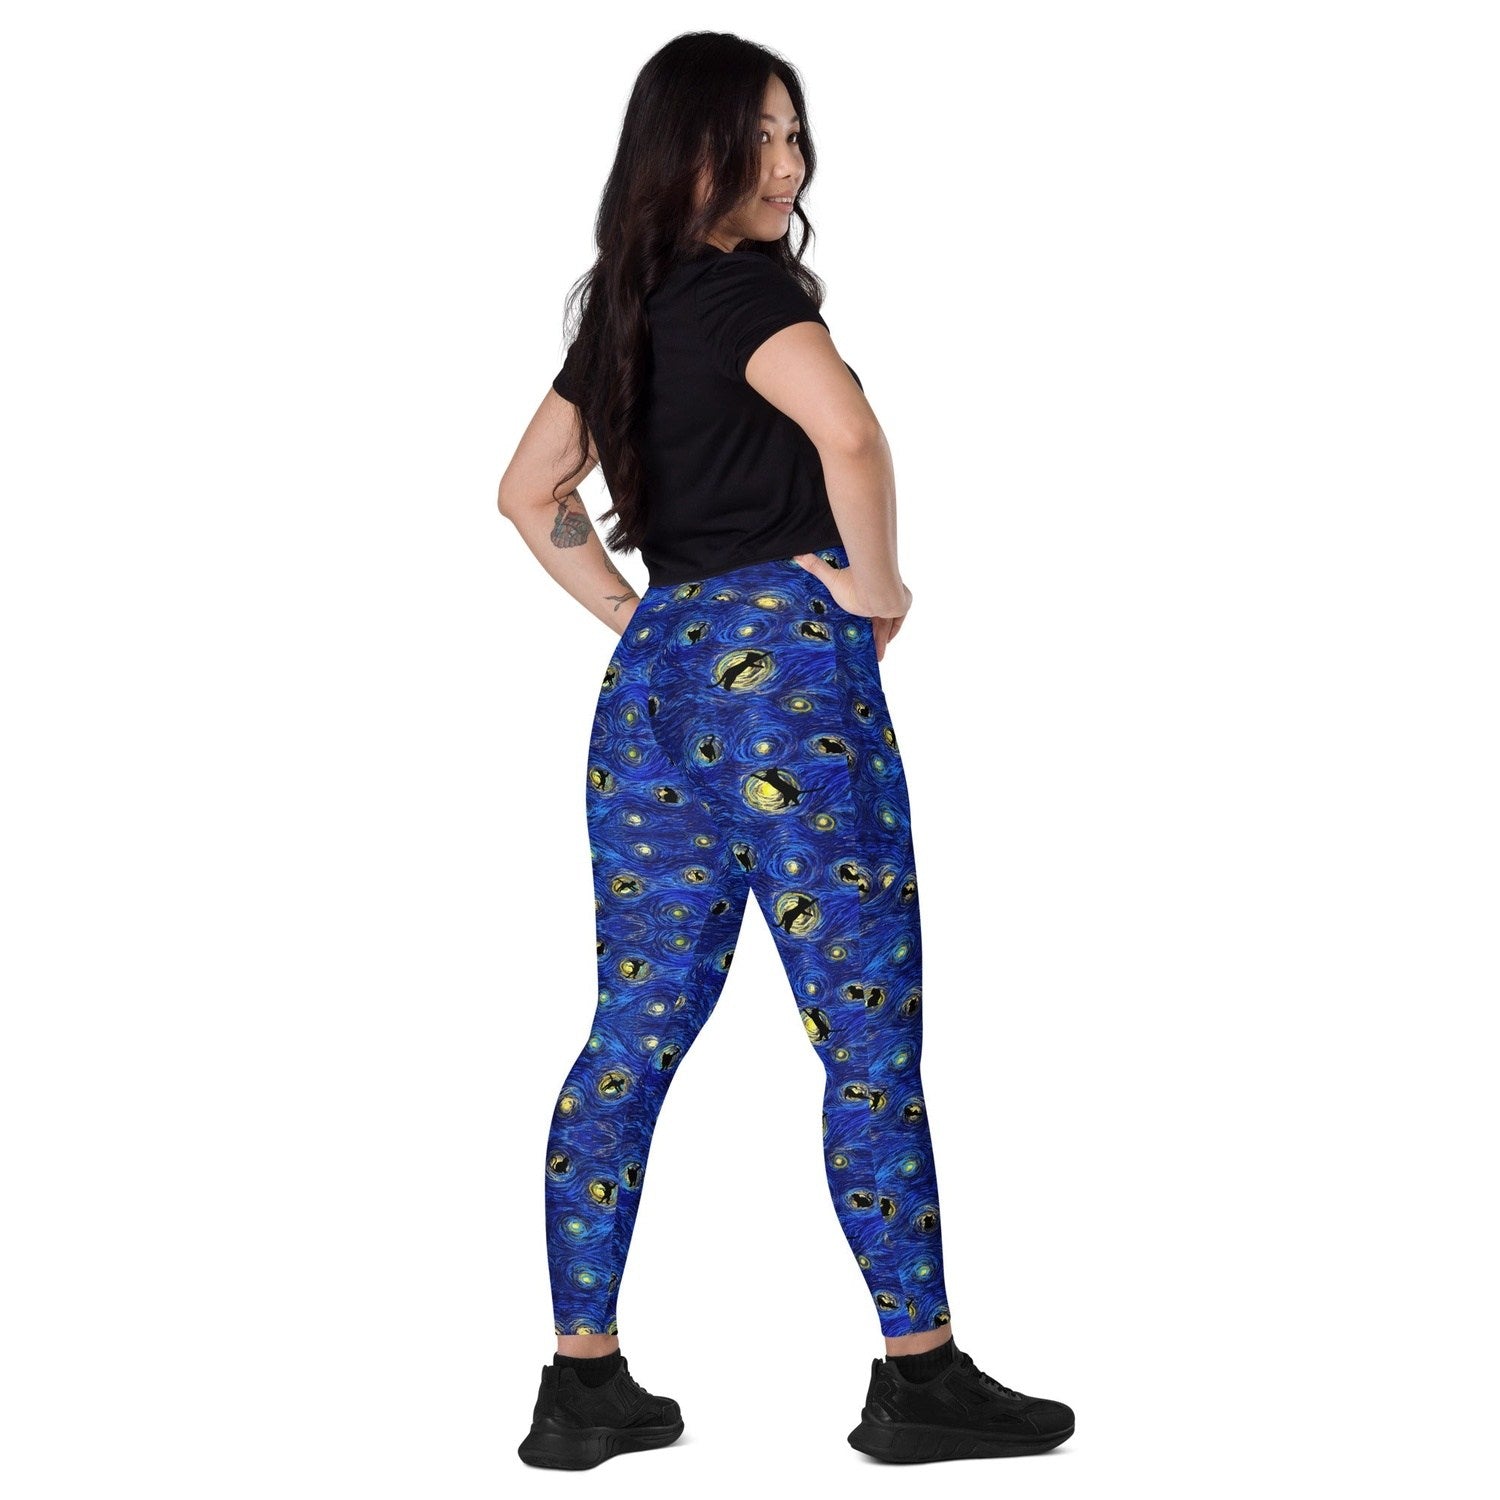 Starry Cat Crossover leggings with pockets